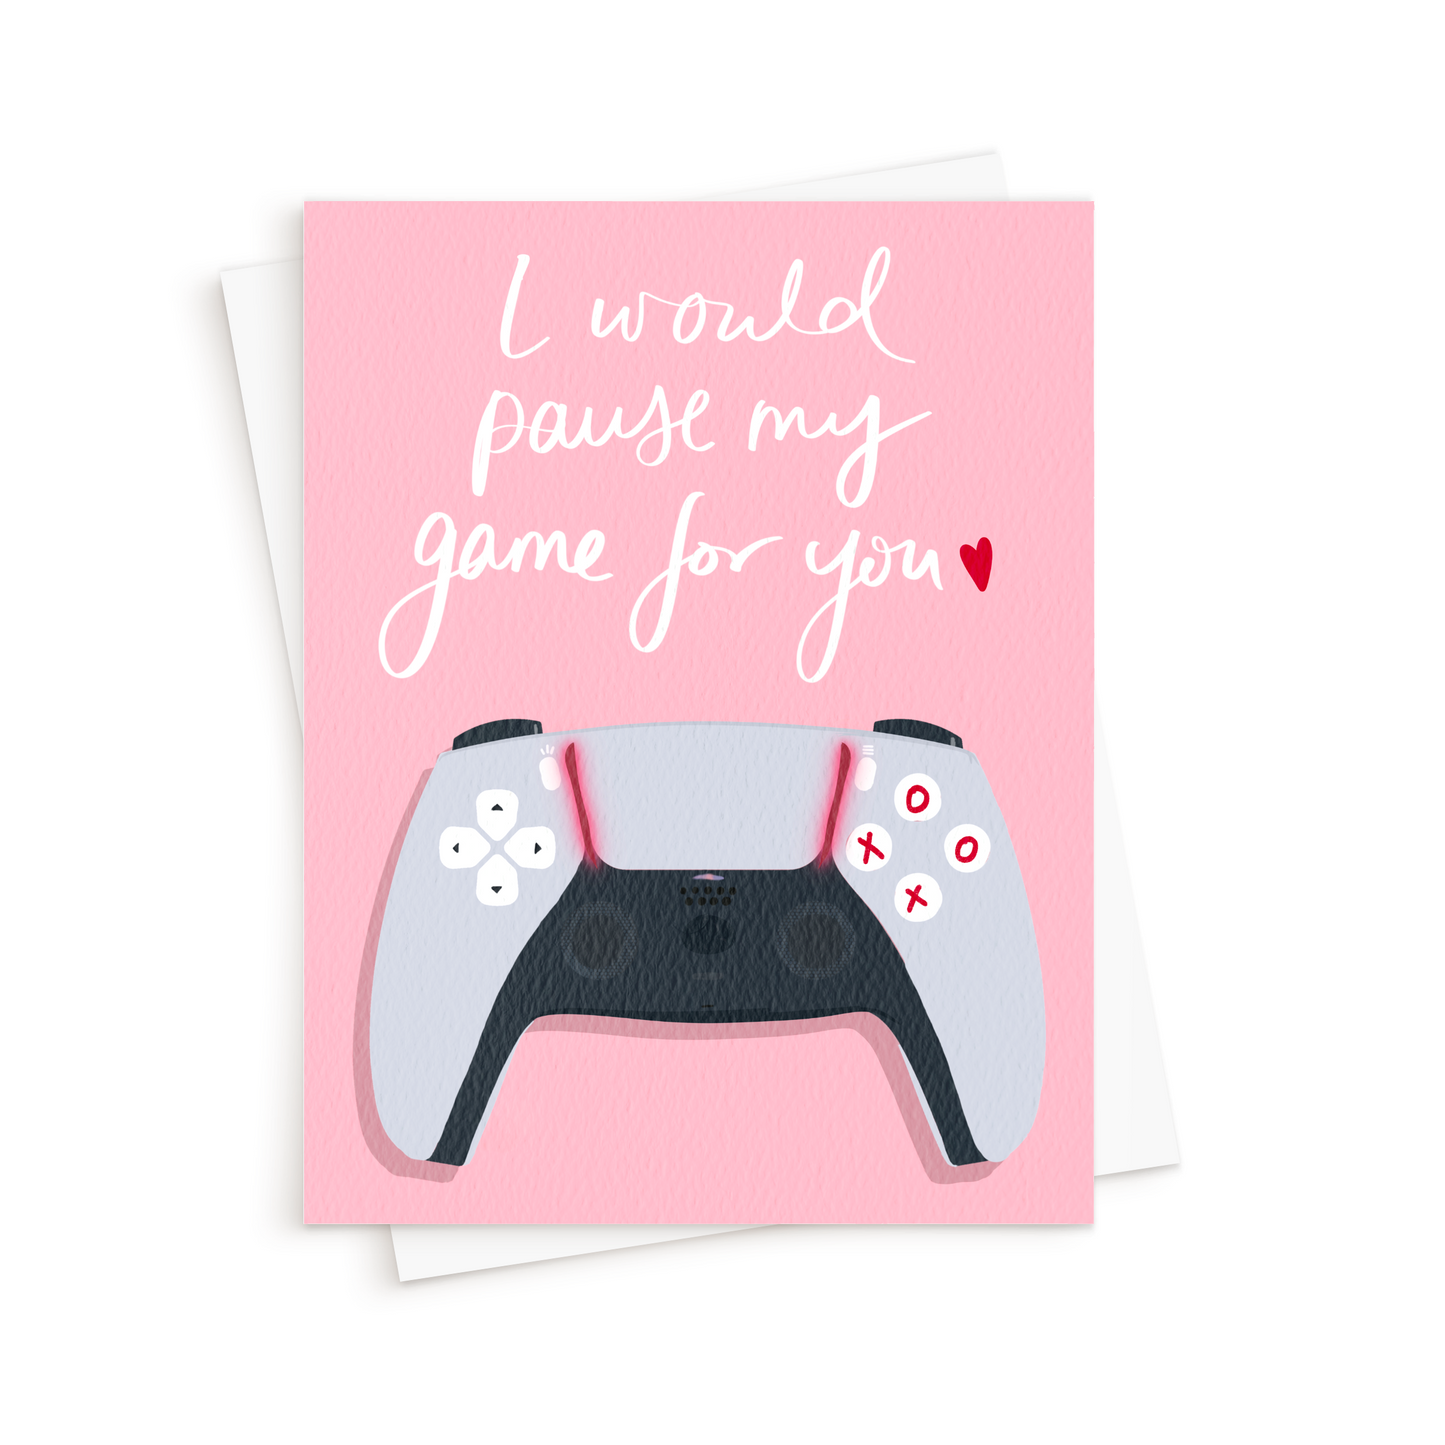 The Pause My Game For You Card